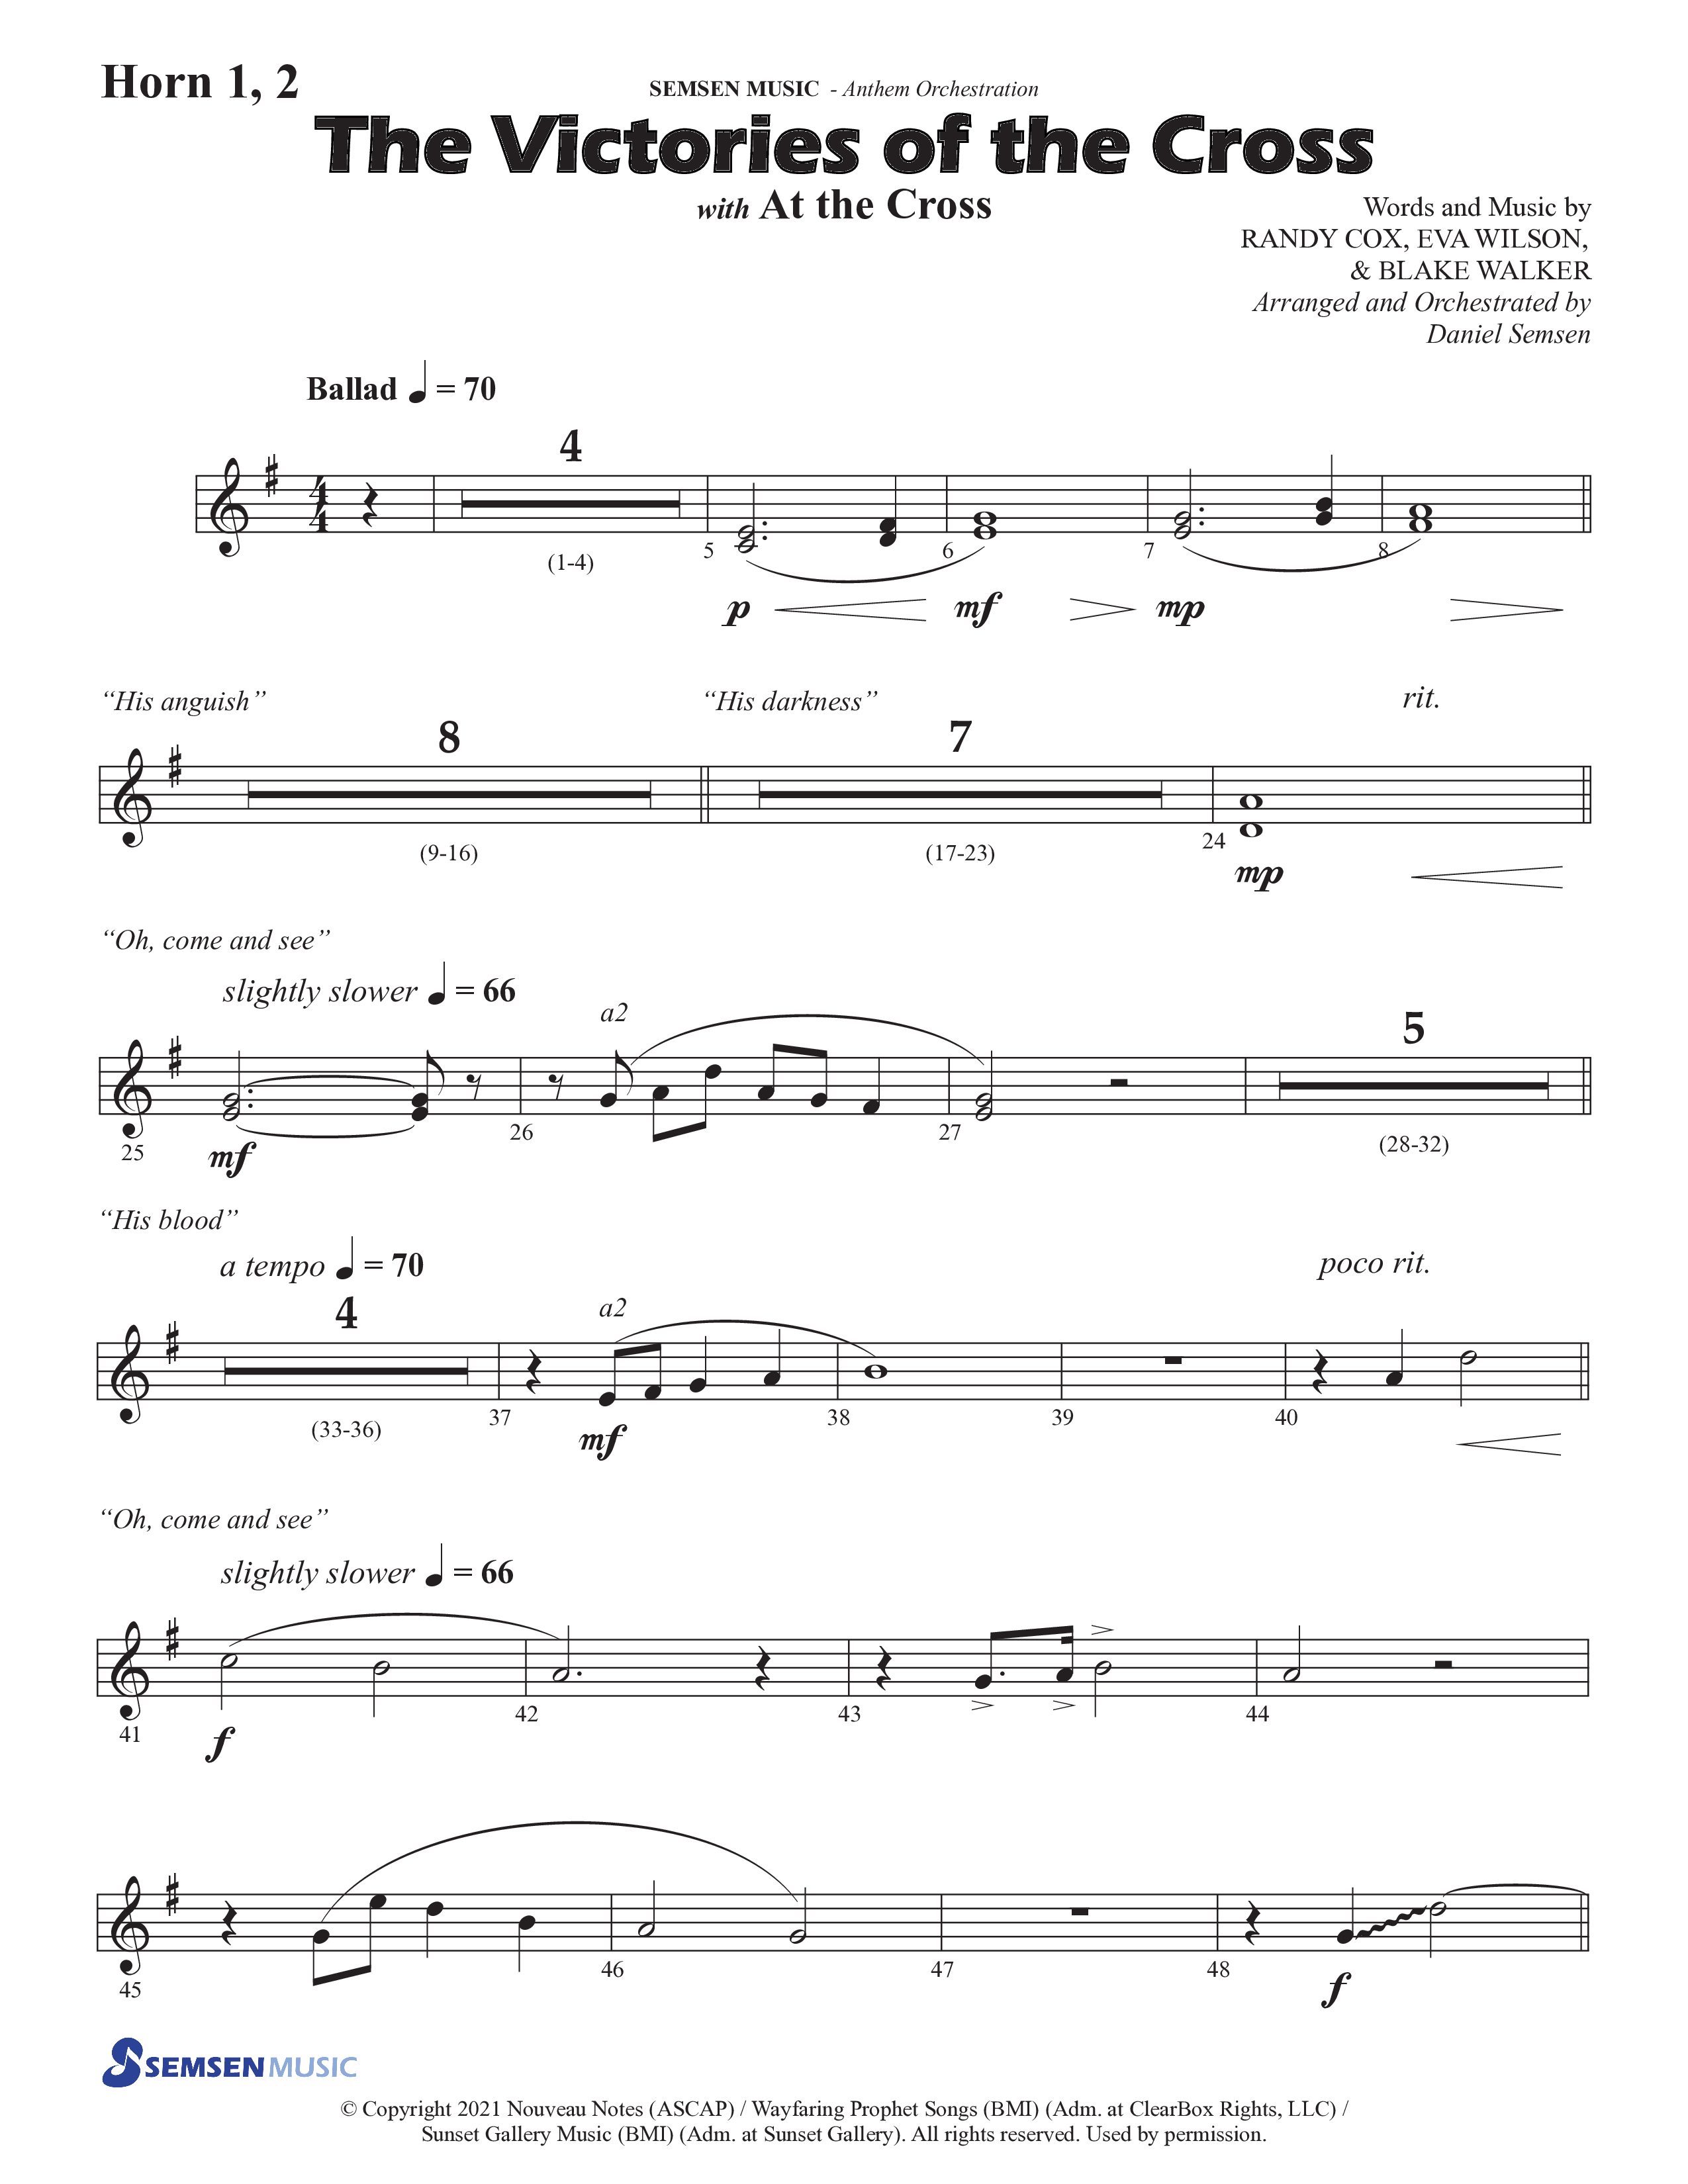 The Victories Of The Cross (with At The Cross) (Choral Anthem SATB) French Horn 1/2 (Semsen Music / Arr. Daniel Semsen)